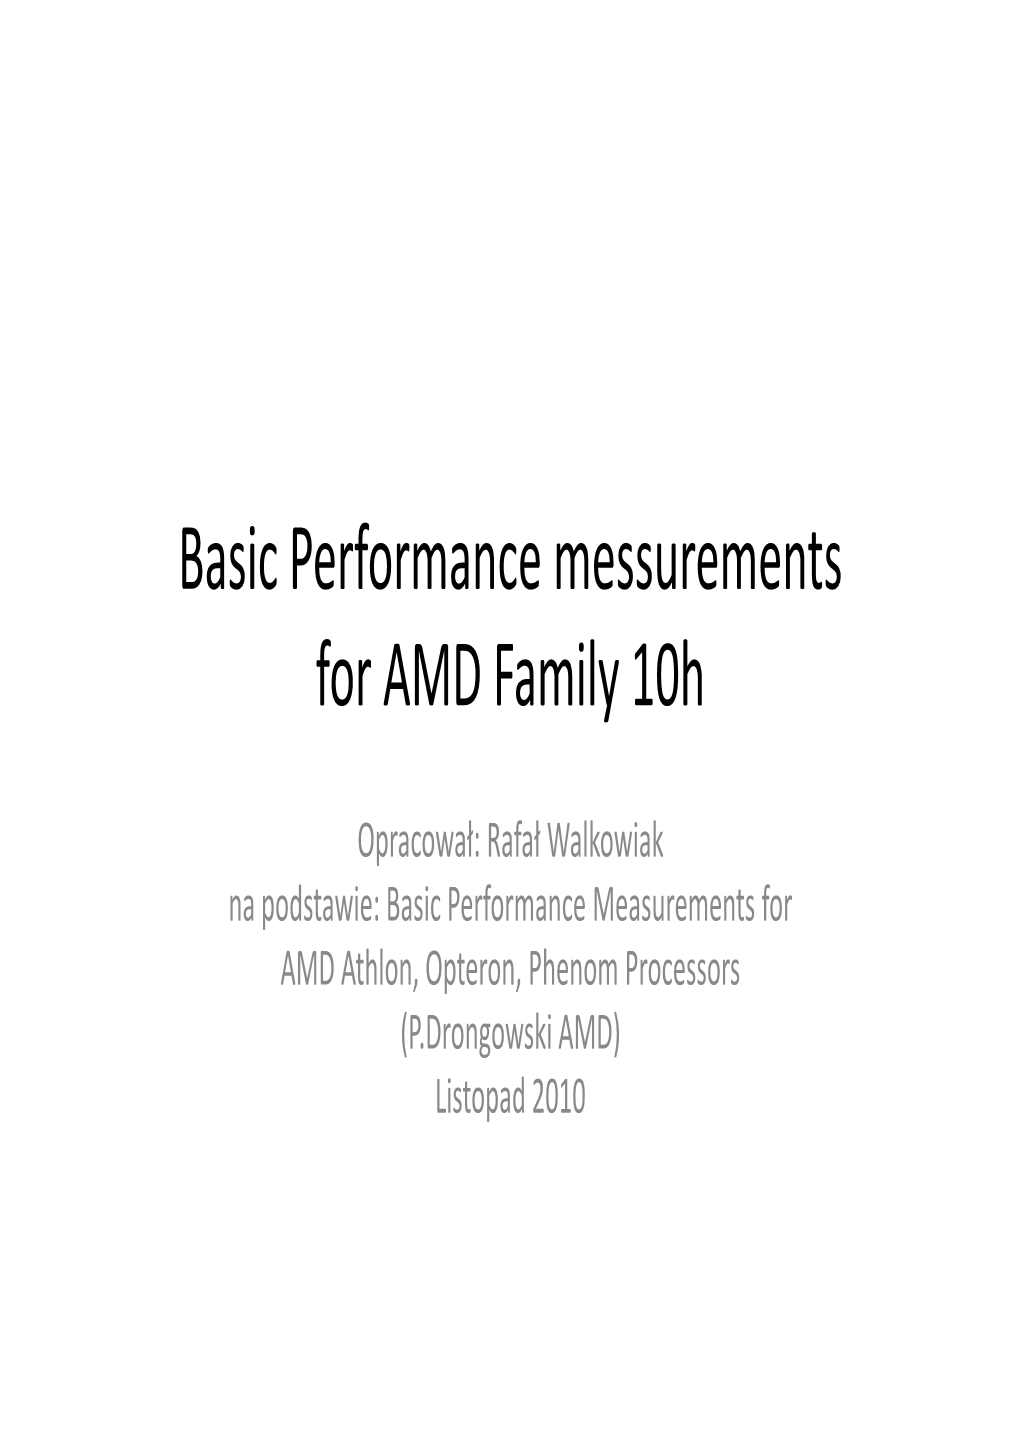 Basic Performance Messurements for AMD Family 10H